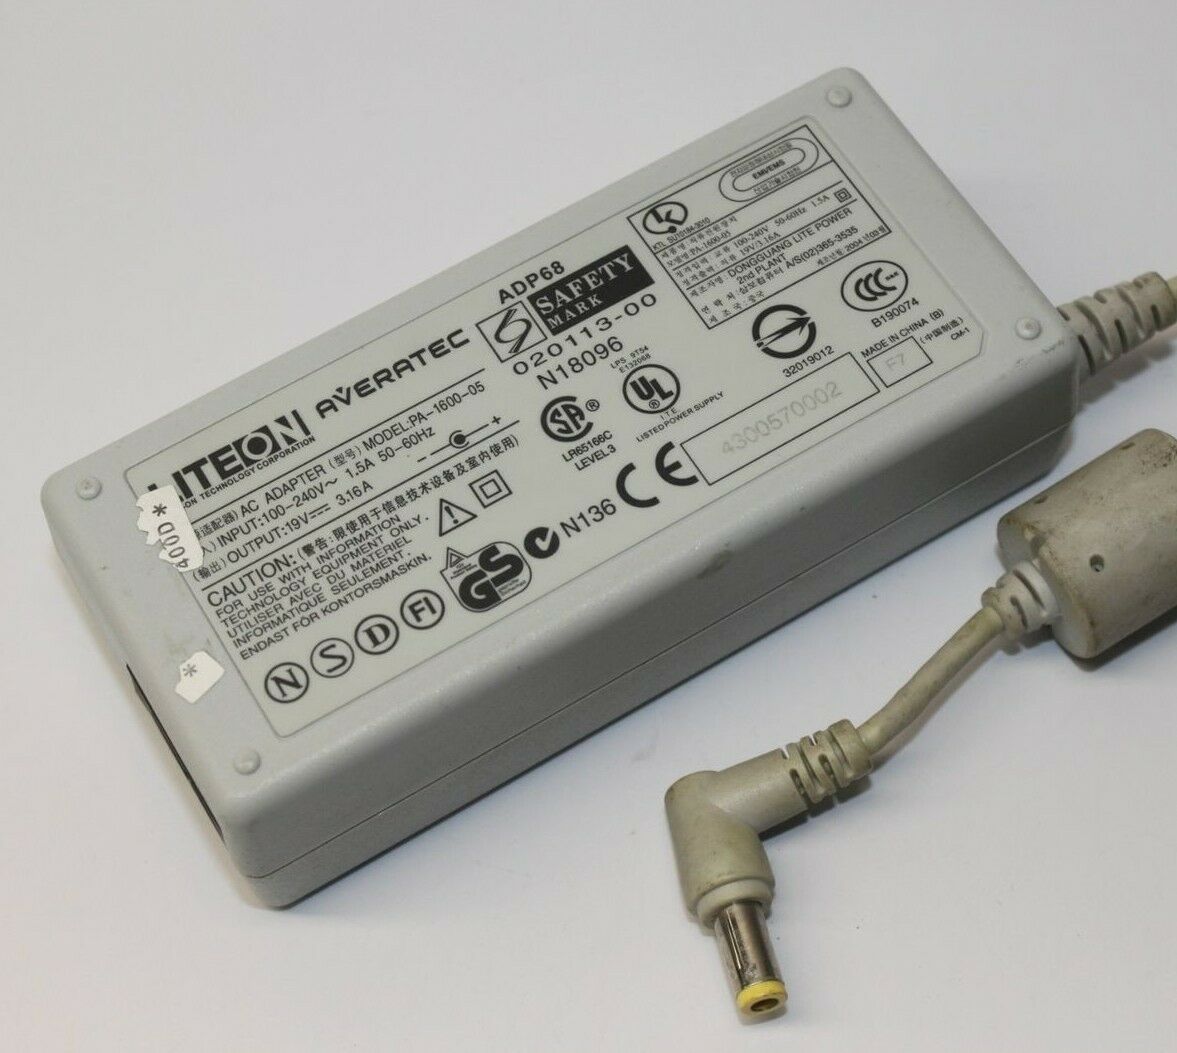 New 19V 3.16A LiteOn PA-1600-05 Power Supply Ac Adapter